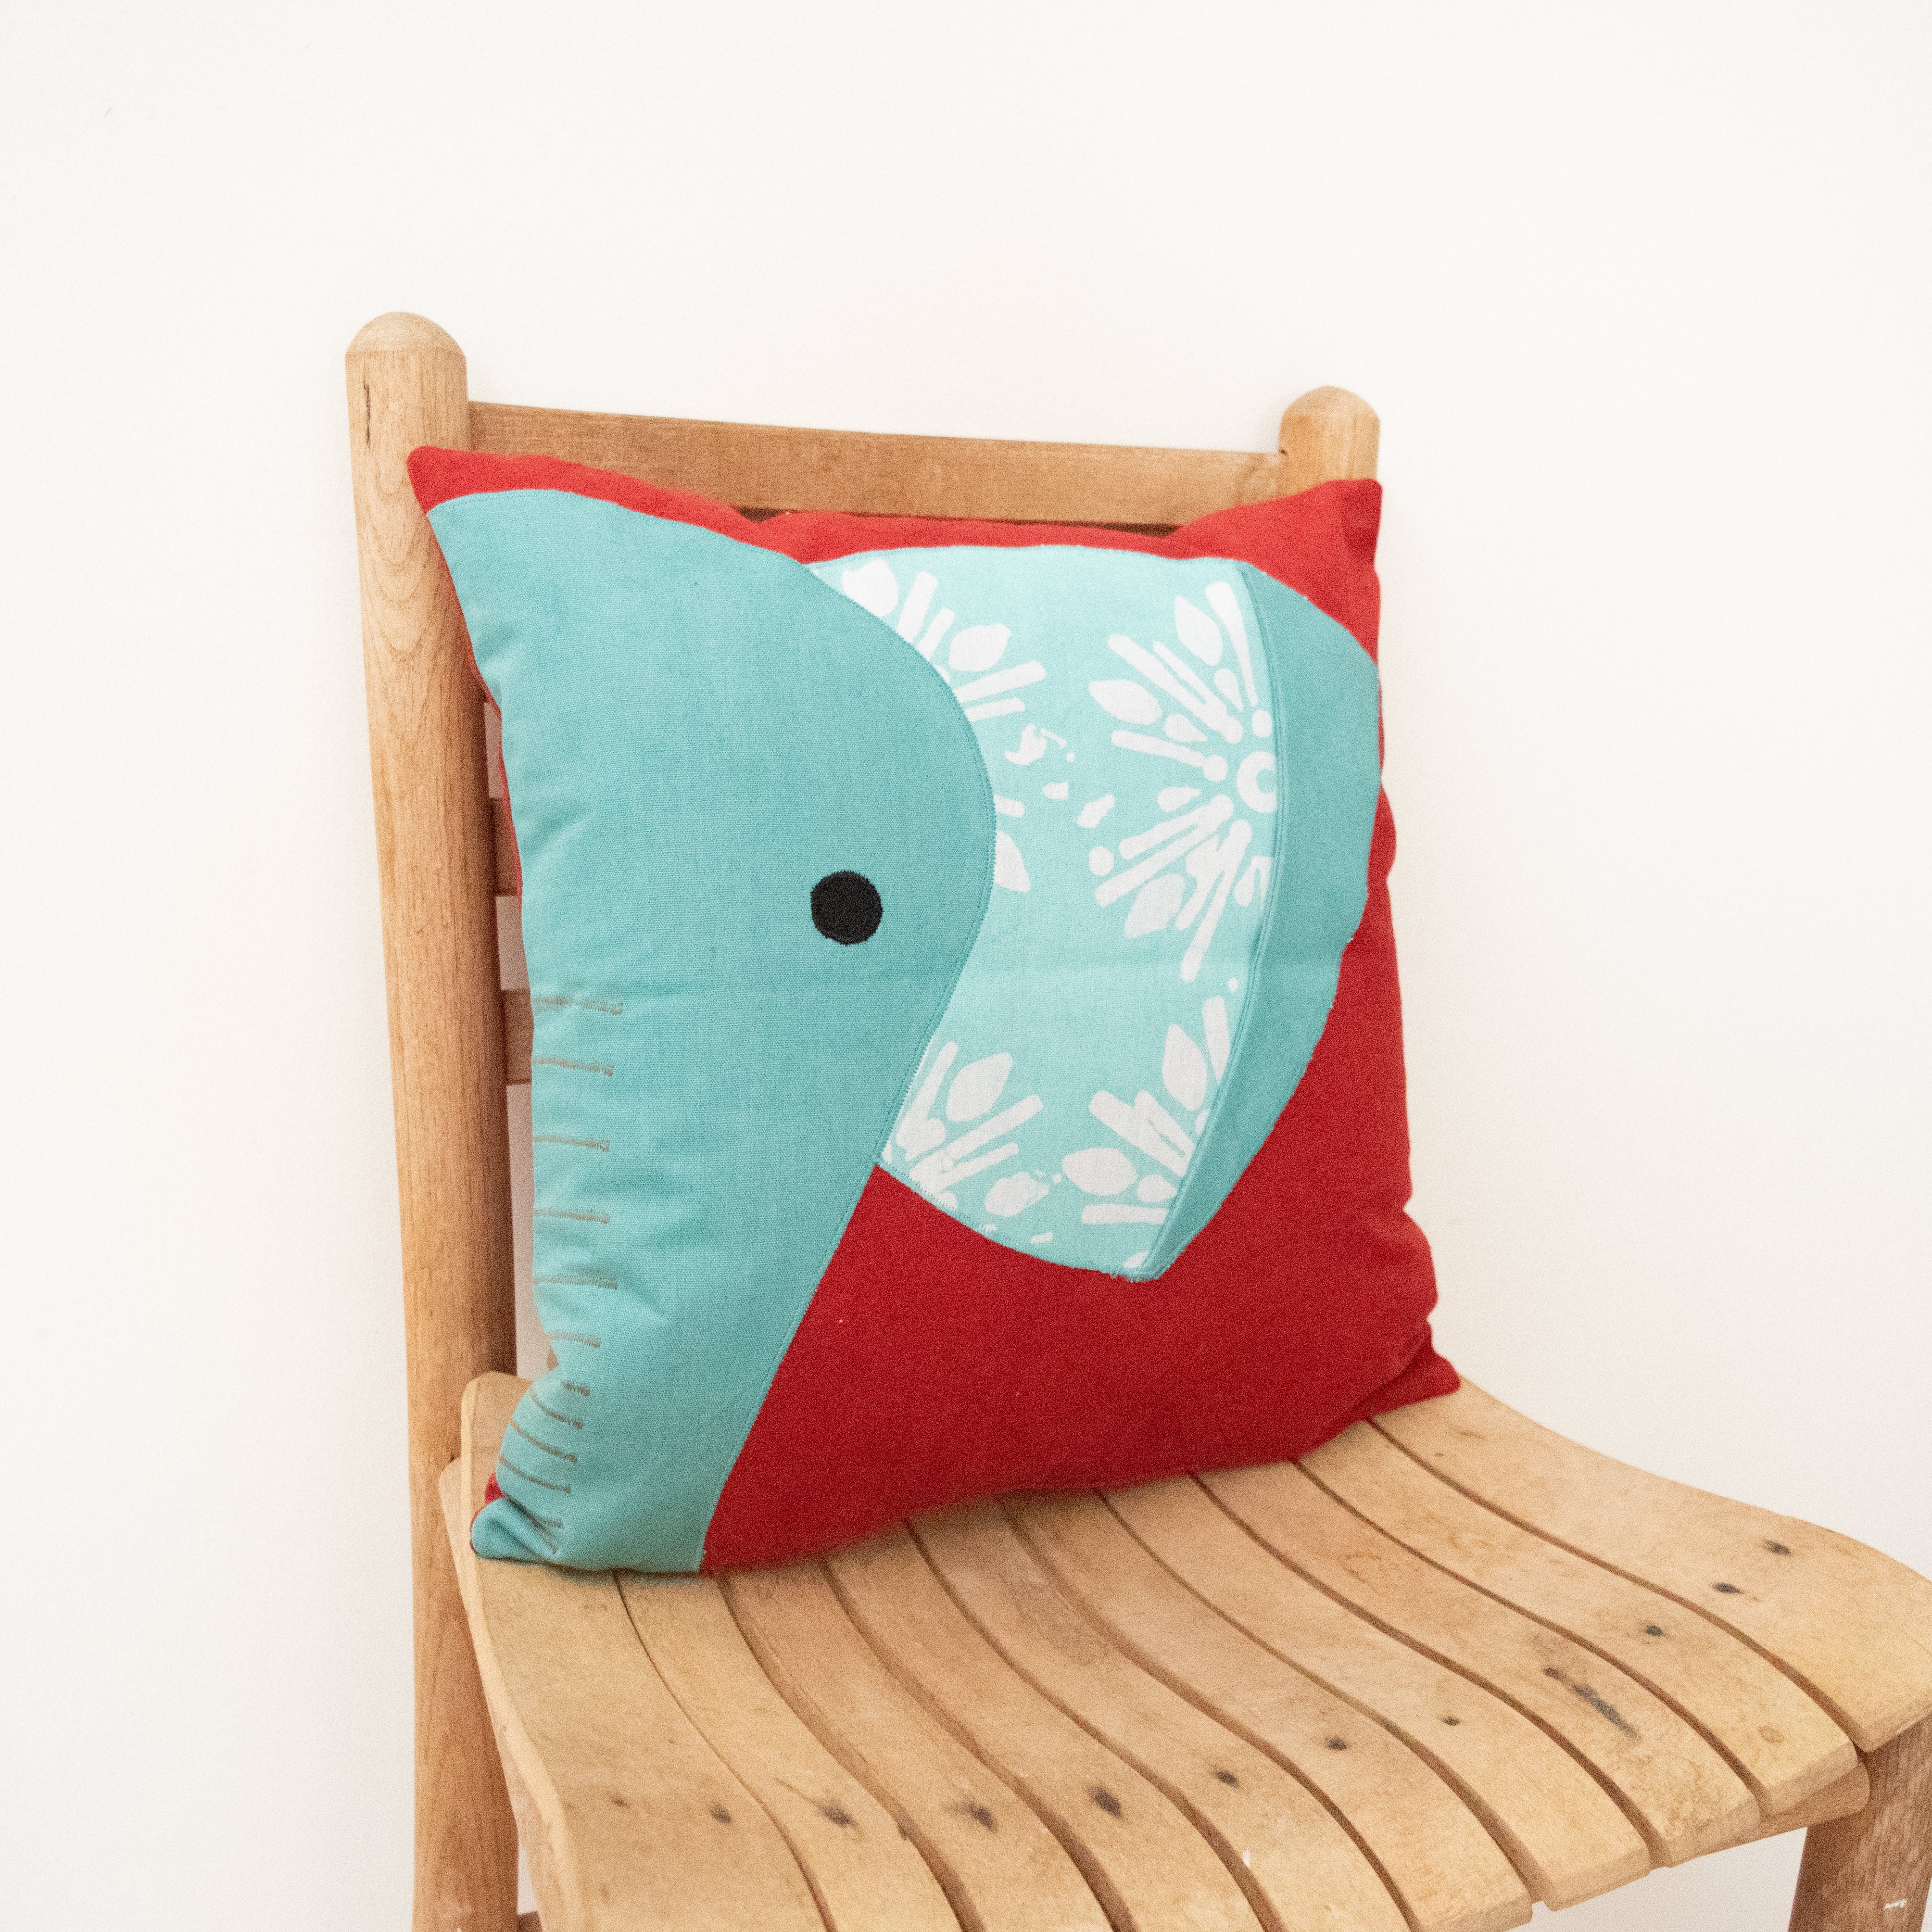 Animal Kingdom Pillow Case - handmade by the women of Amani using Kenyan materials for a Fair Trade boutique